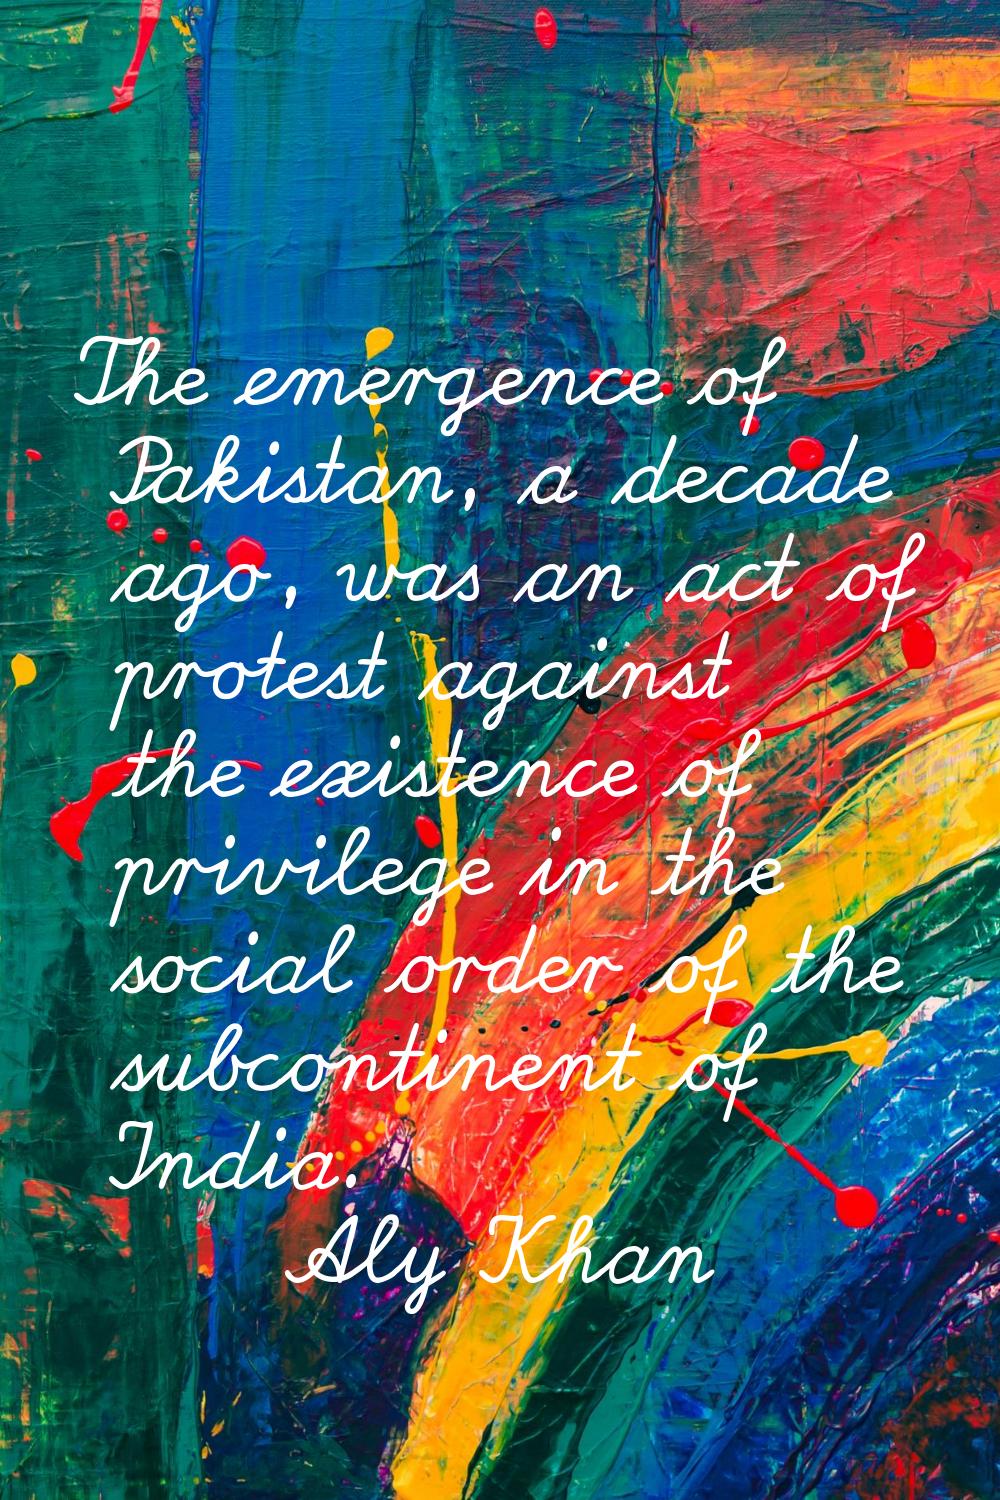 The emergence of Pakistan, a decade ago, was an act of protest against the existence of privilege i